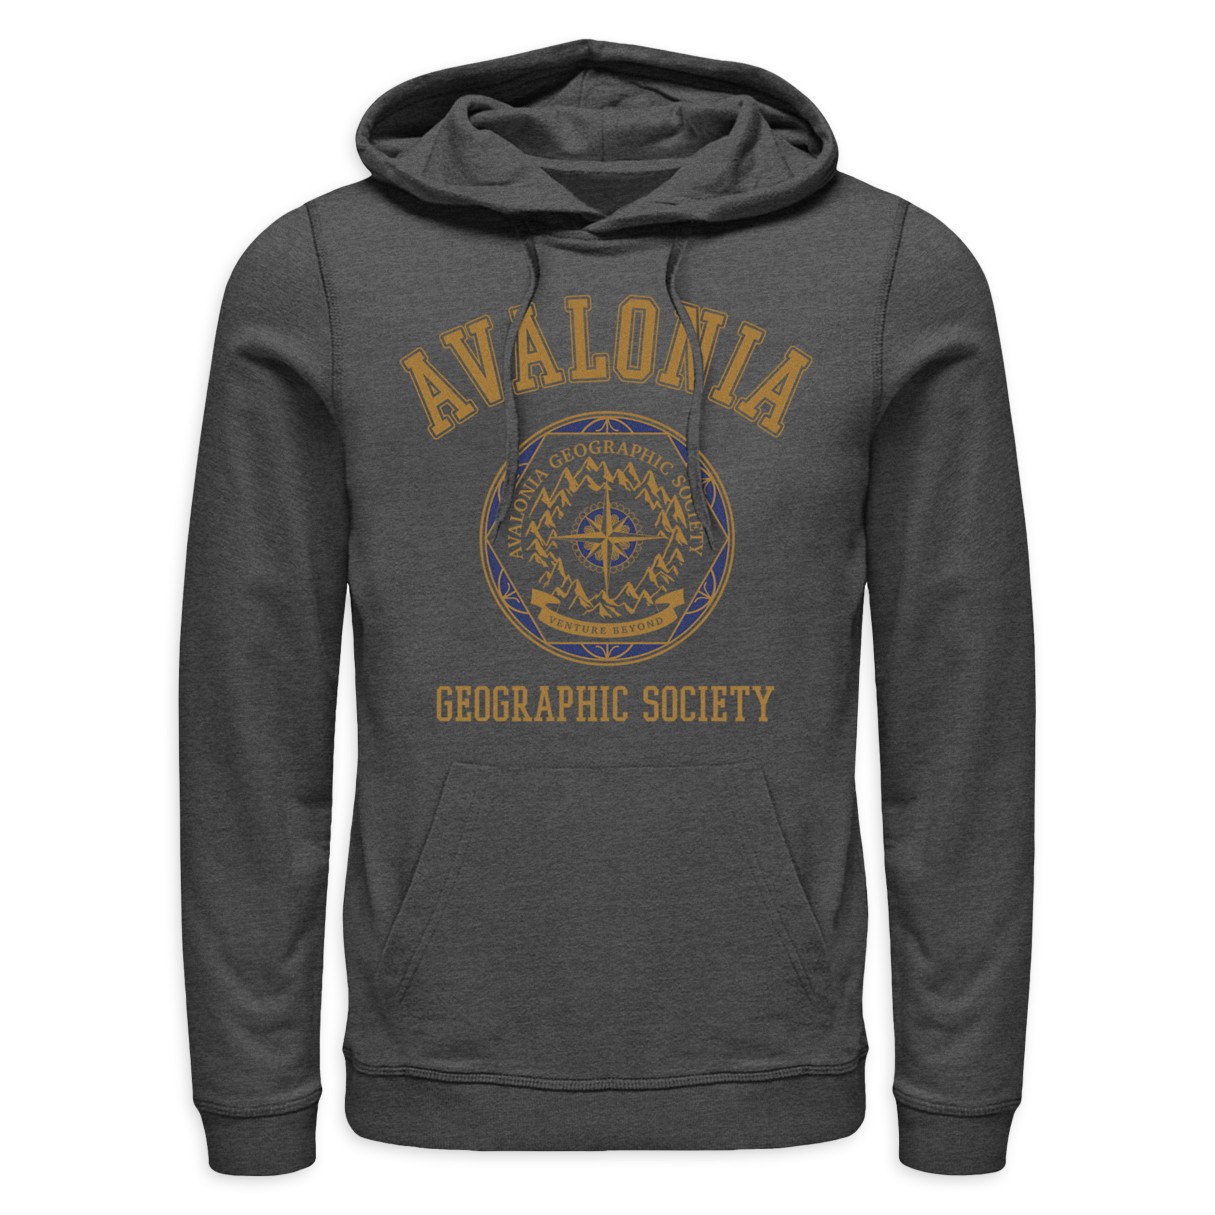 Avalonia Geographic Society Pullover Hoodie for Adults – Strange World